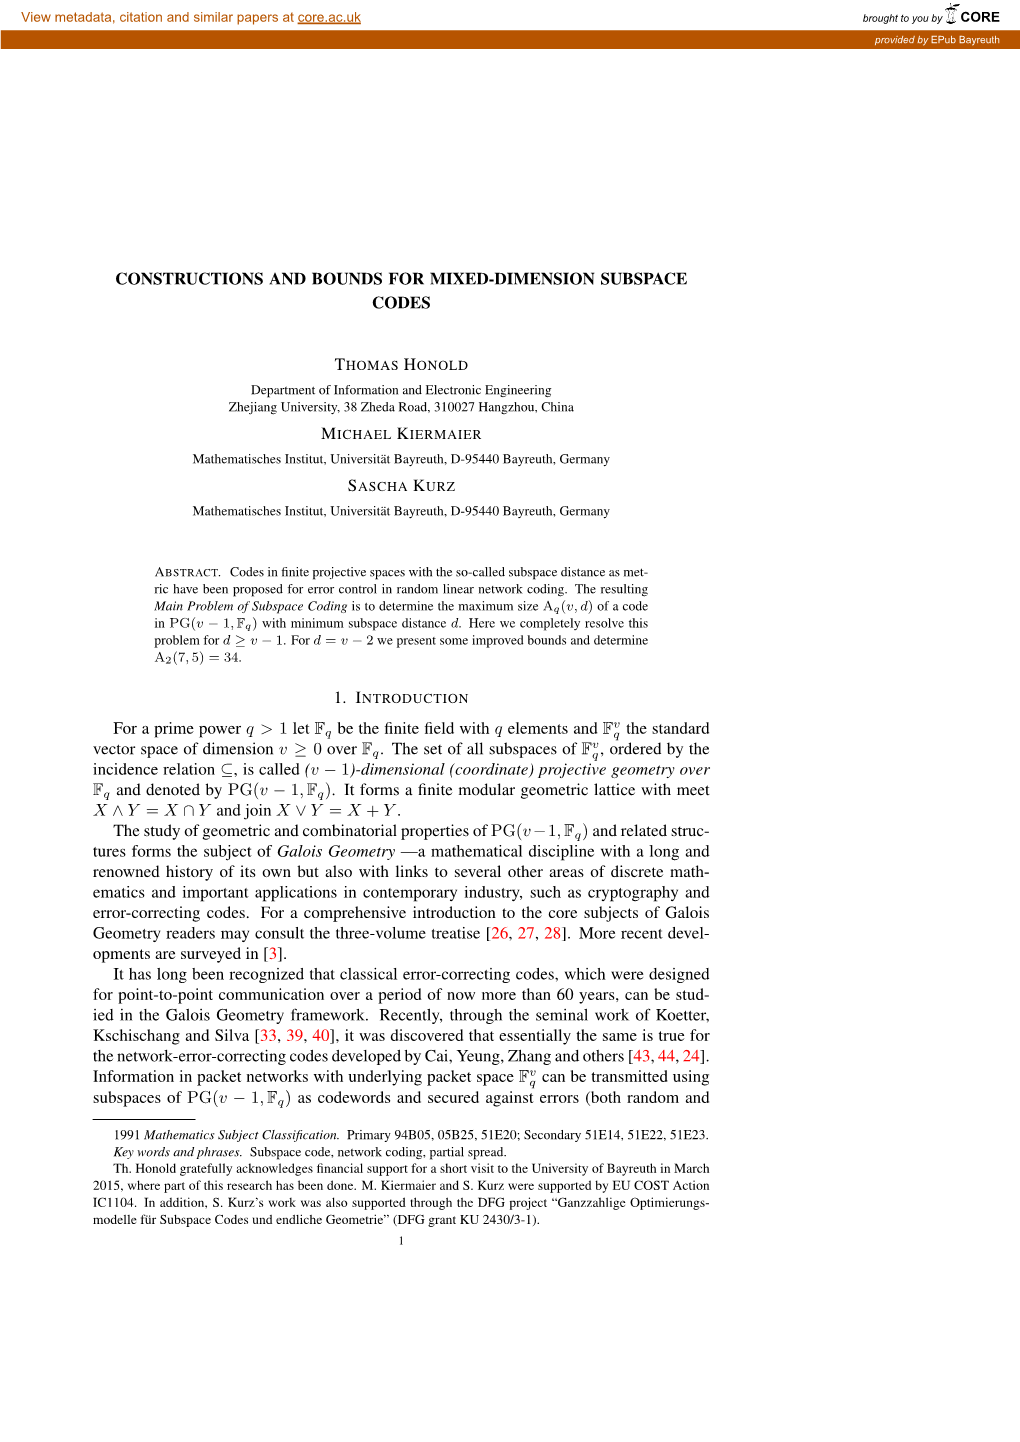 Constructions and Bounds for Mixed-Dimension Subspace Codes